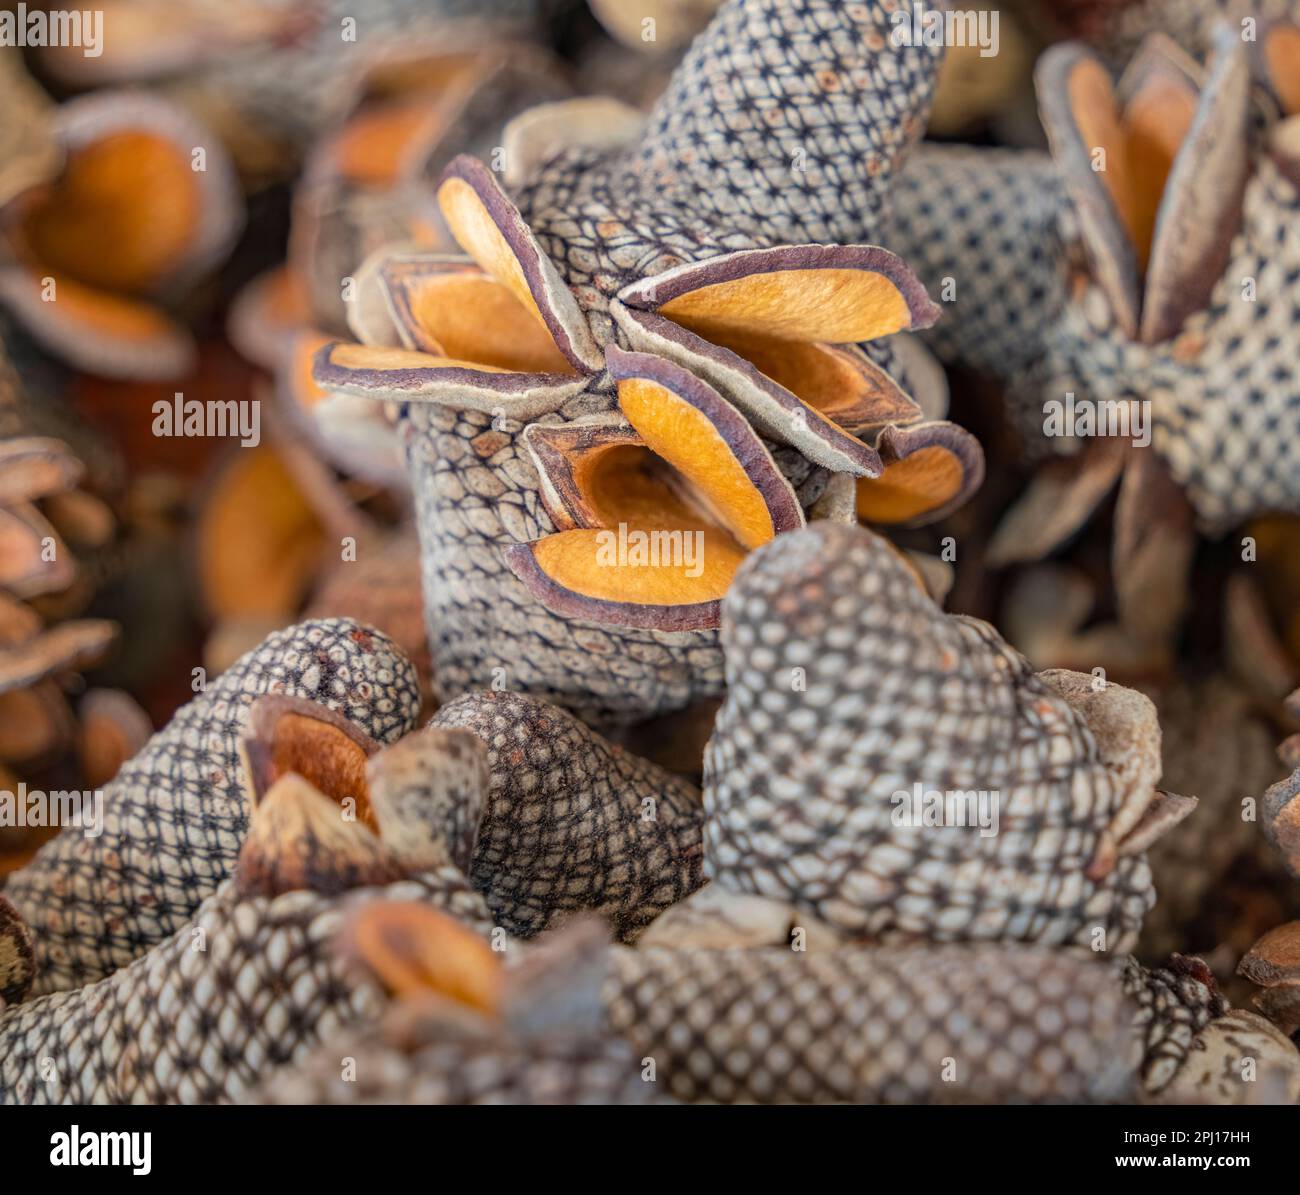 Full frame closeup shot showing some Banksia cones Stock Photo